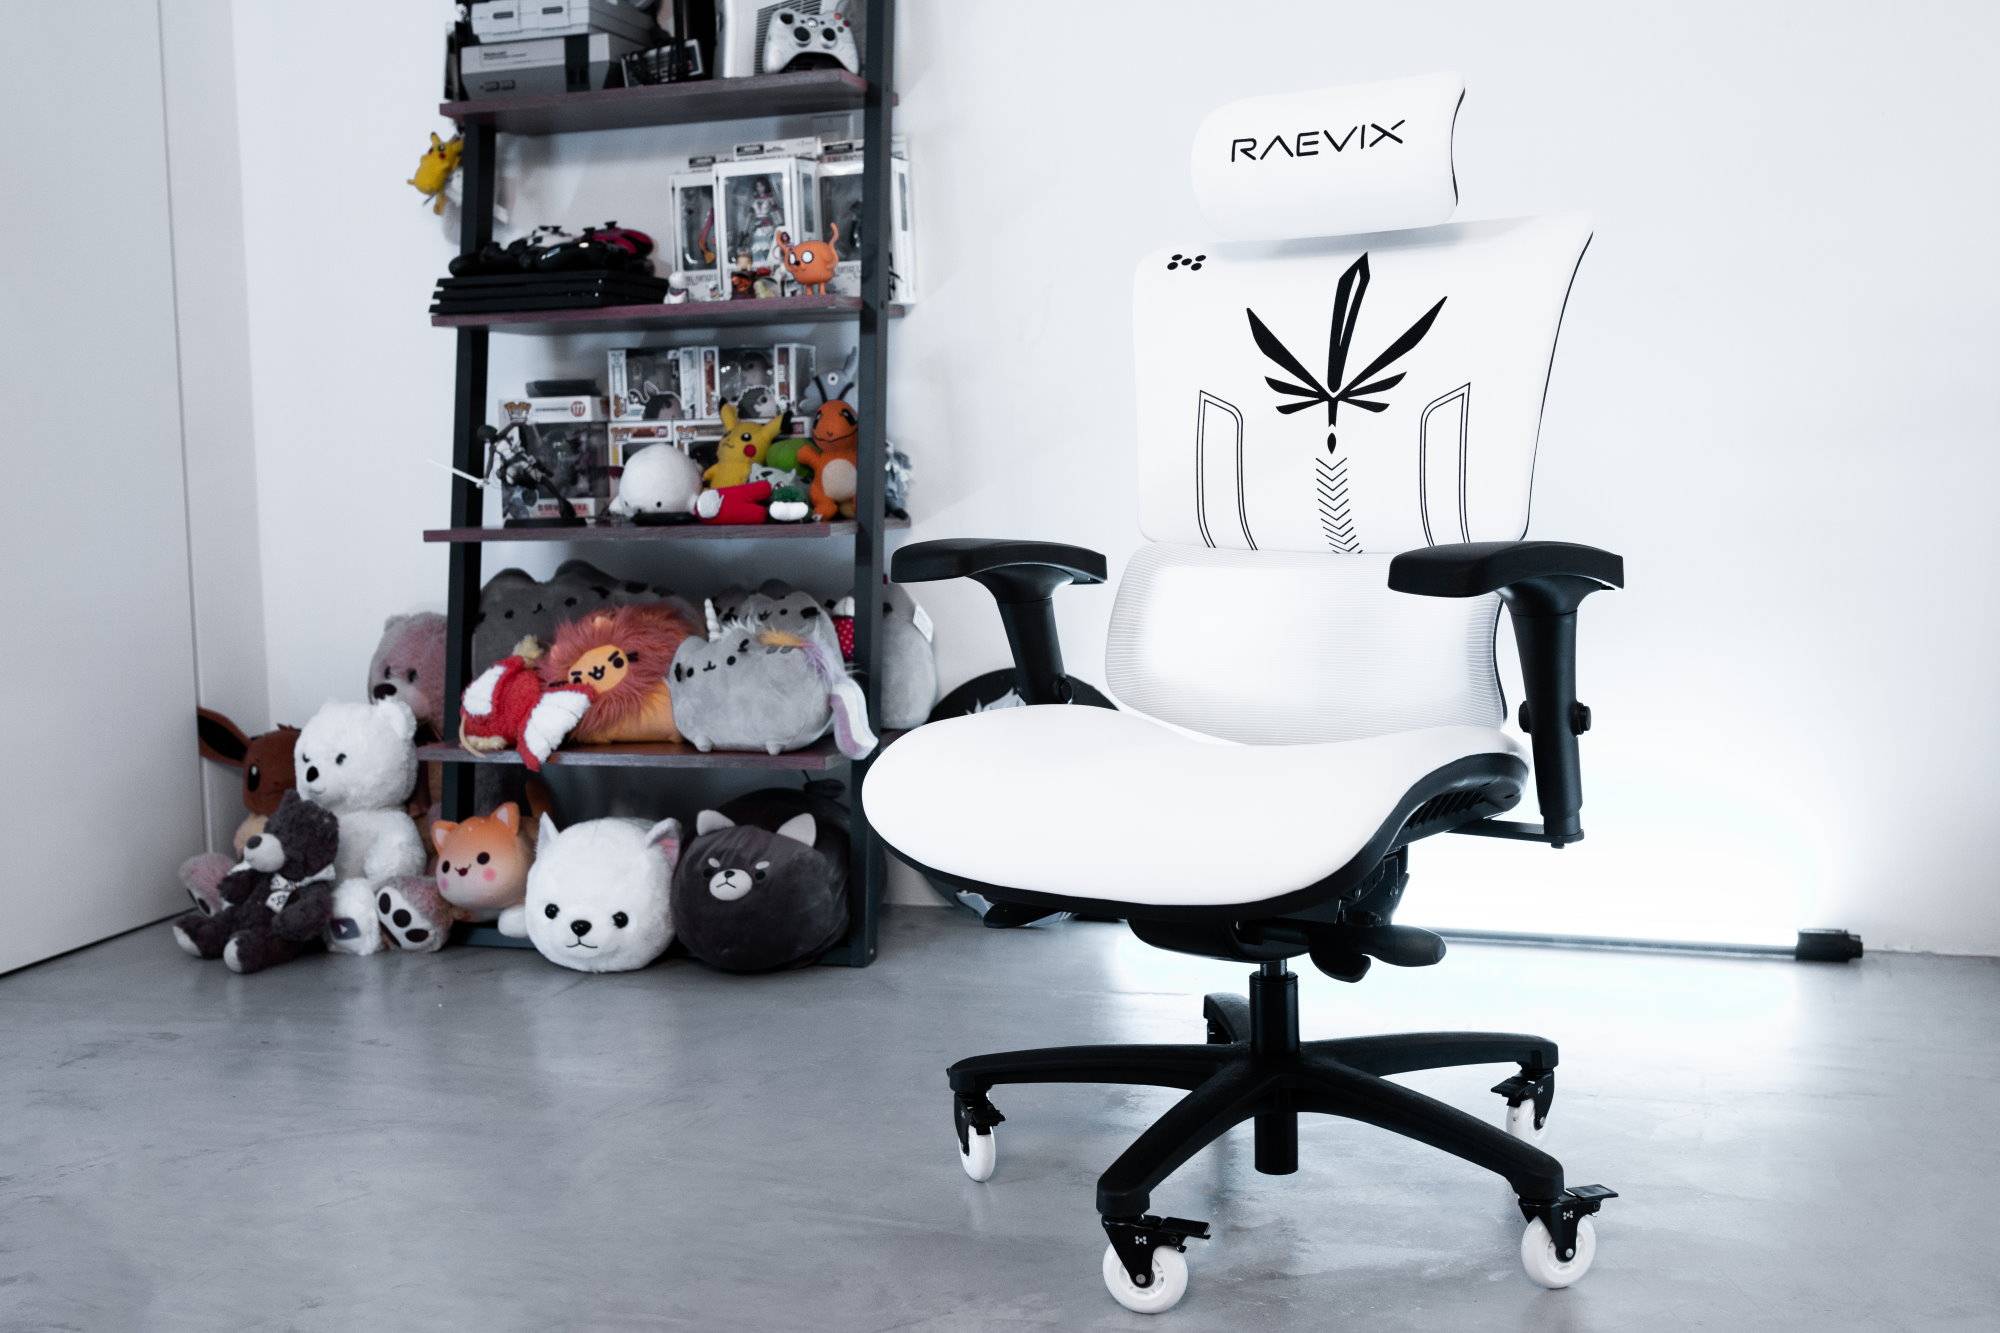 Valkyrae Partners With Mavix For Special Edition Gaming Chair